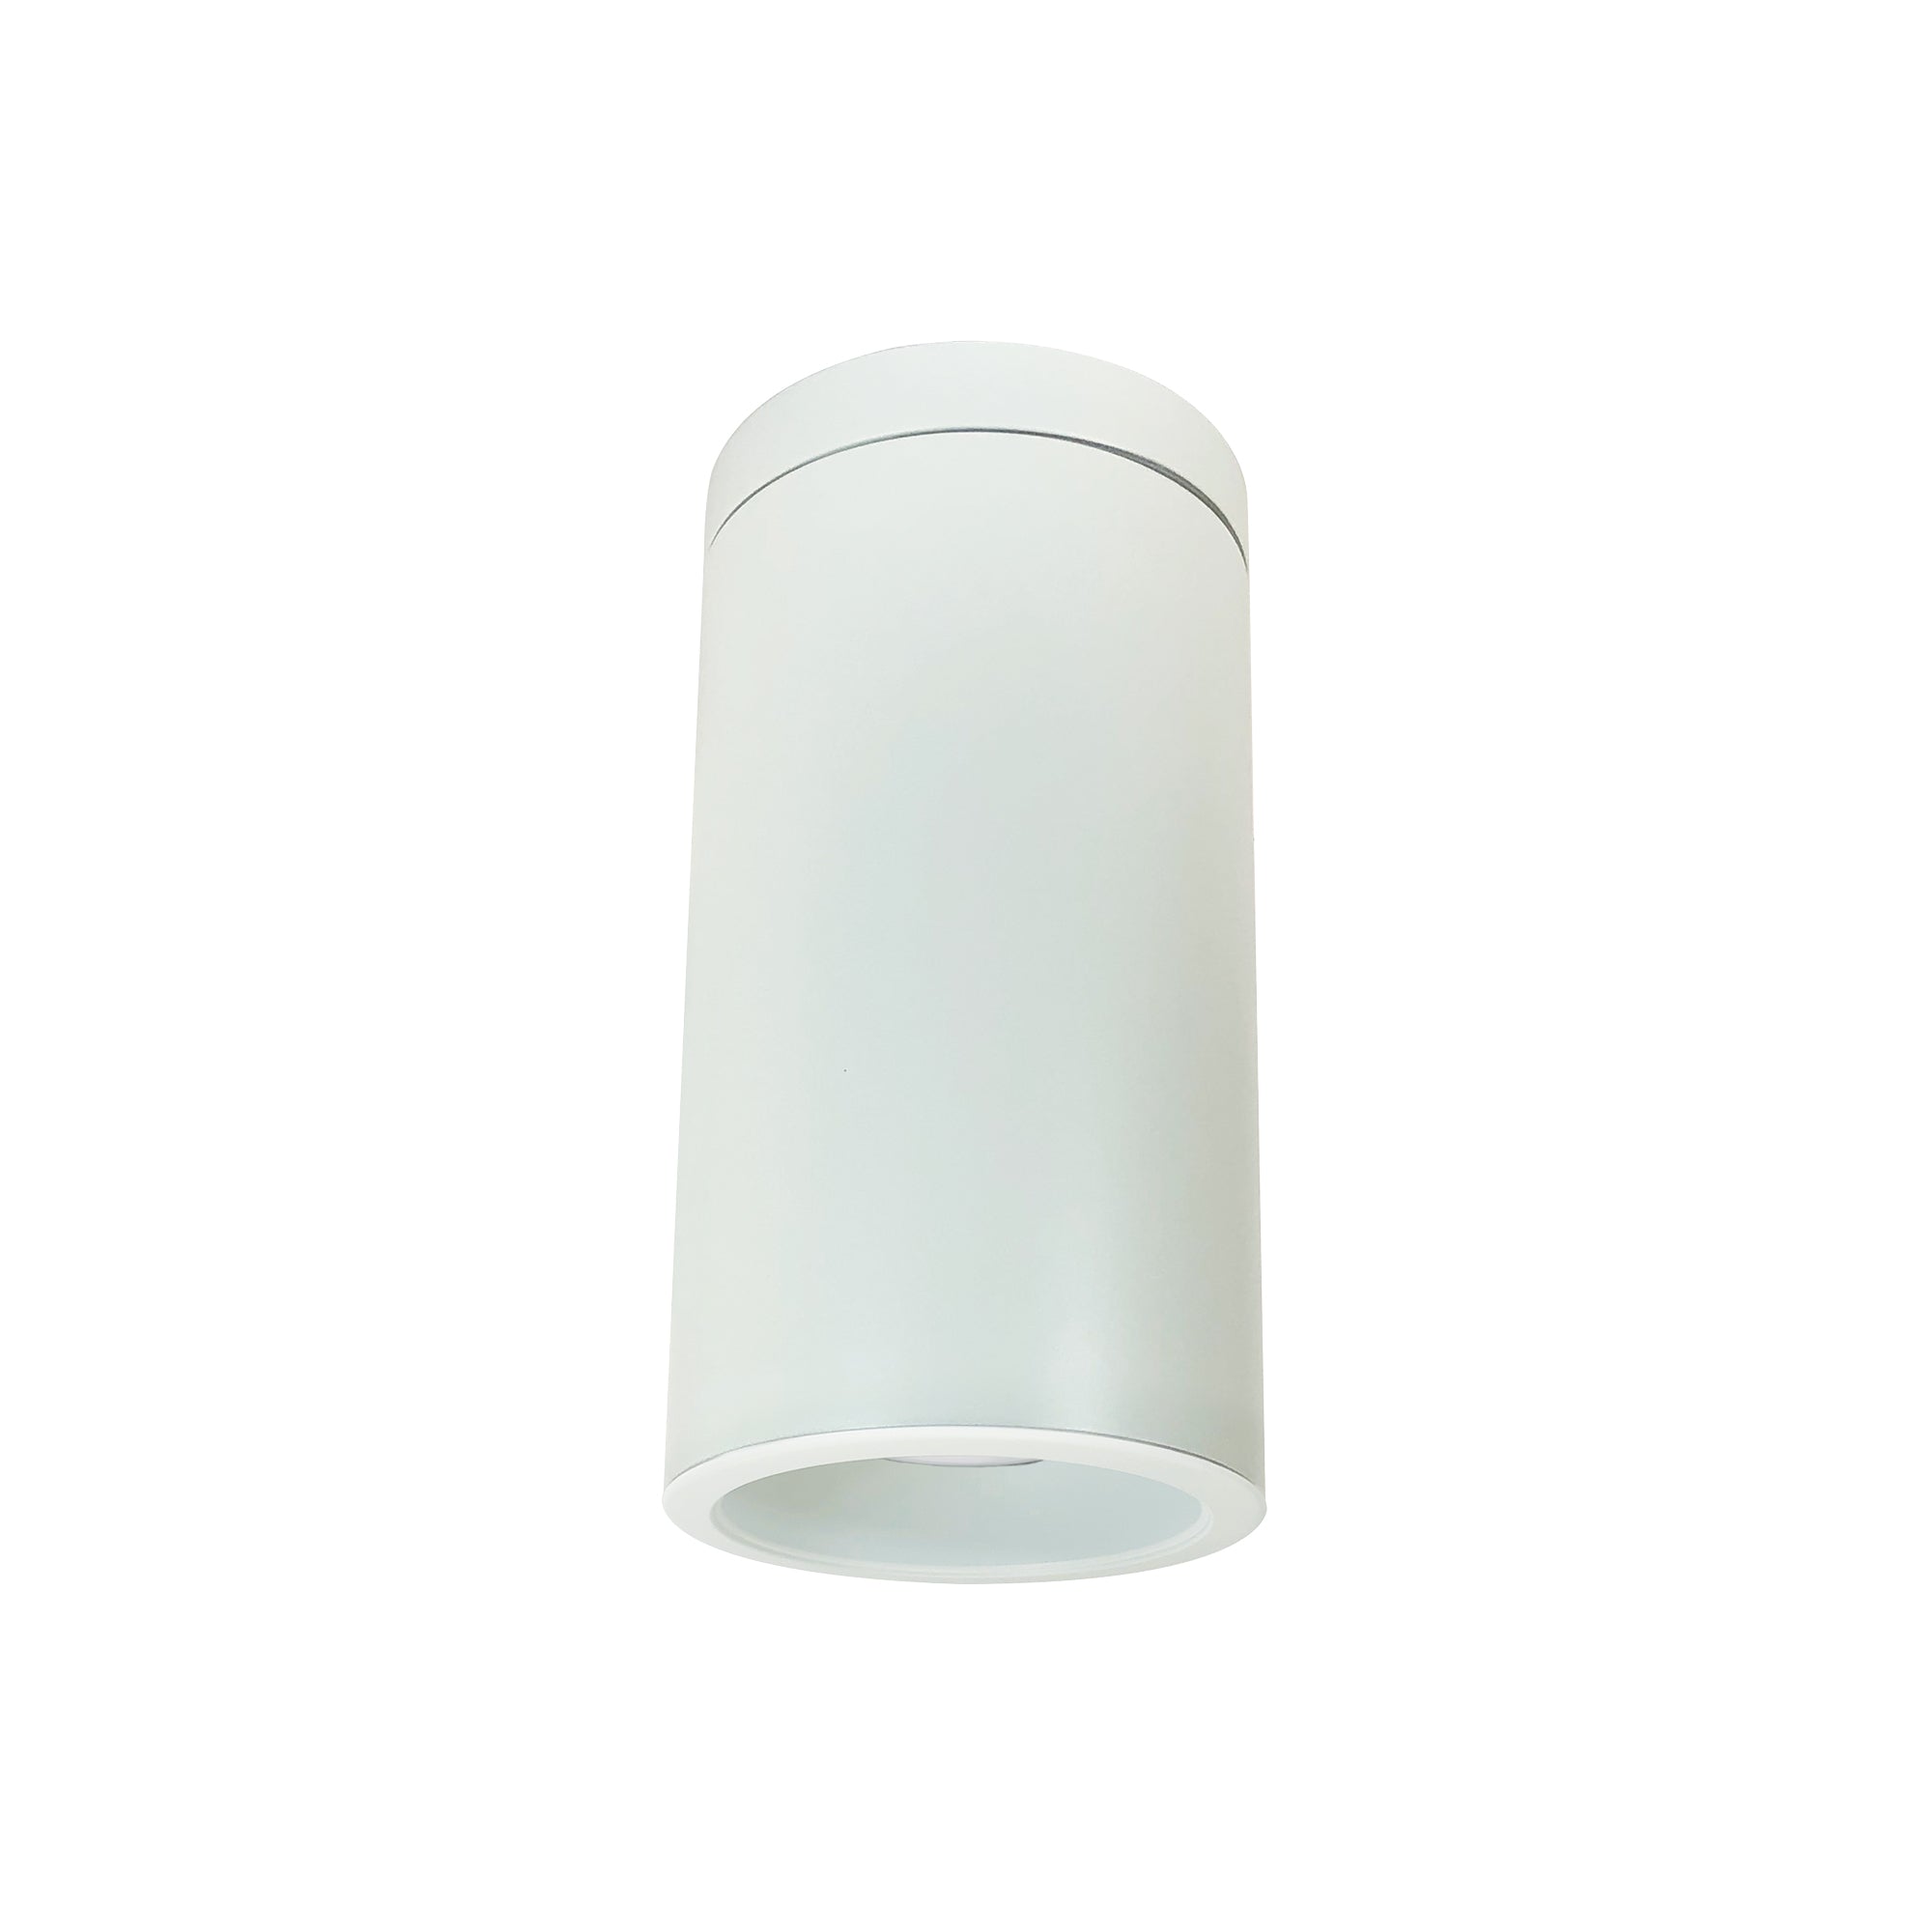 Nora 6 Inch Cobalt Surface Mount Cylinder White 750Lm 10W 4000K White/White Reflector 120V Triac/ELV Dimming (NYLD2-6S075140WWW)